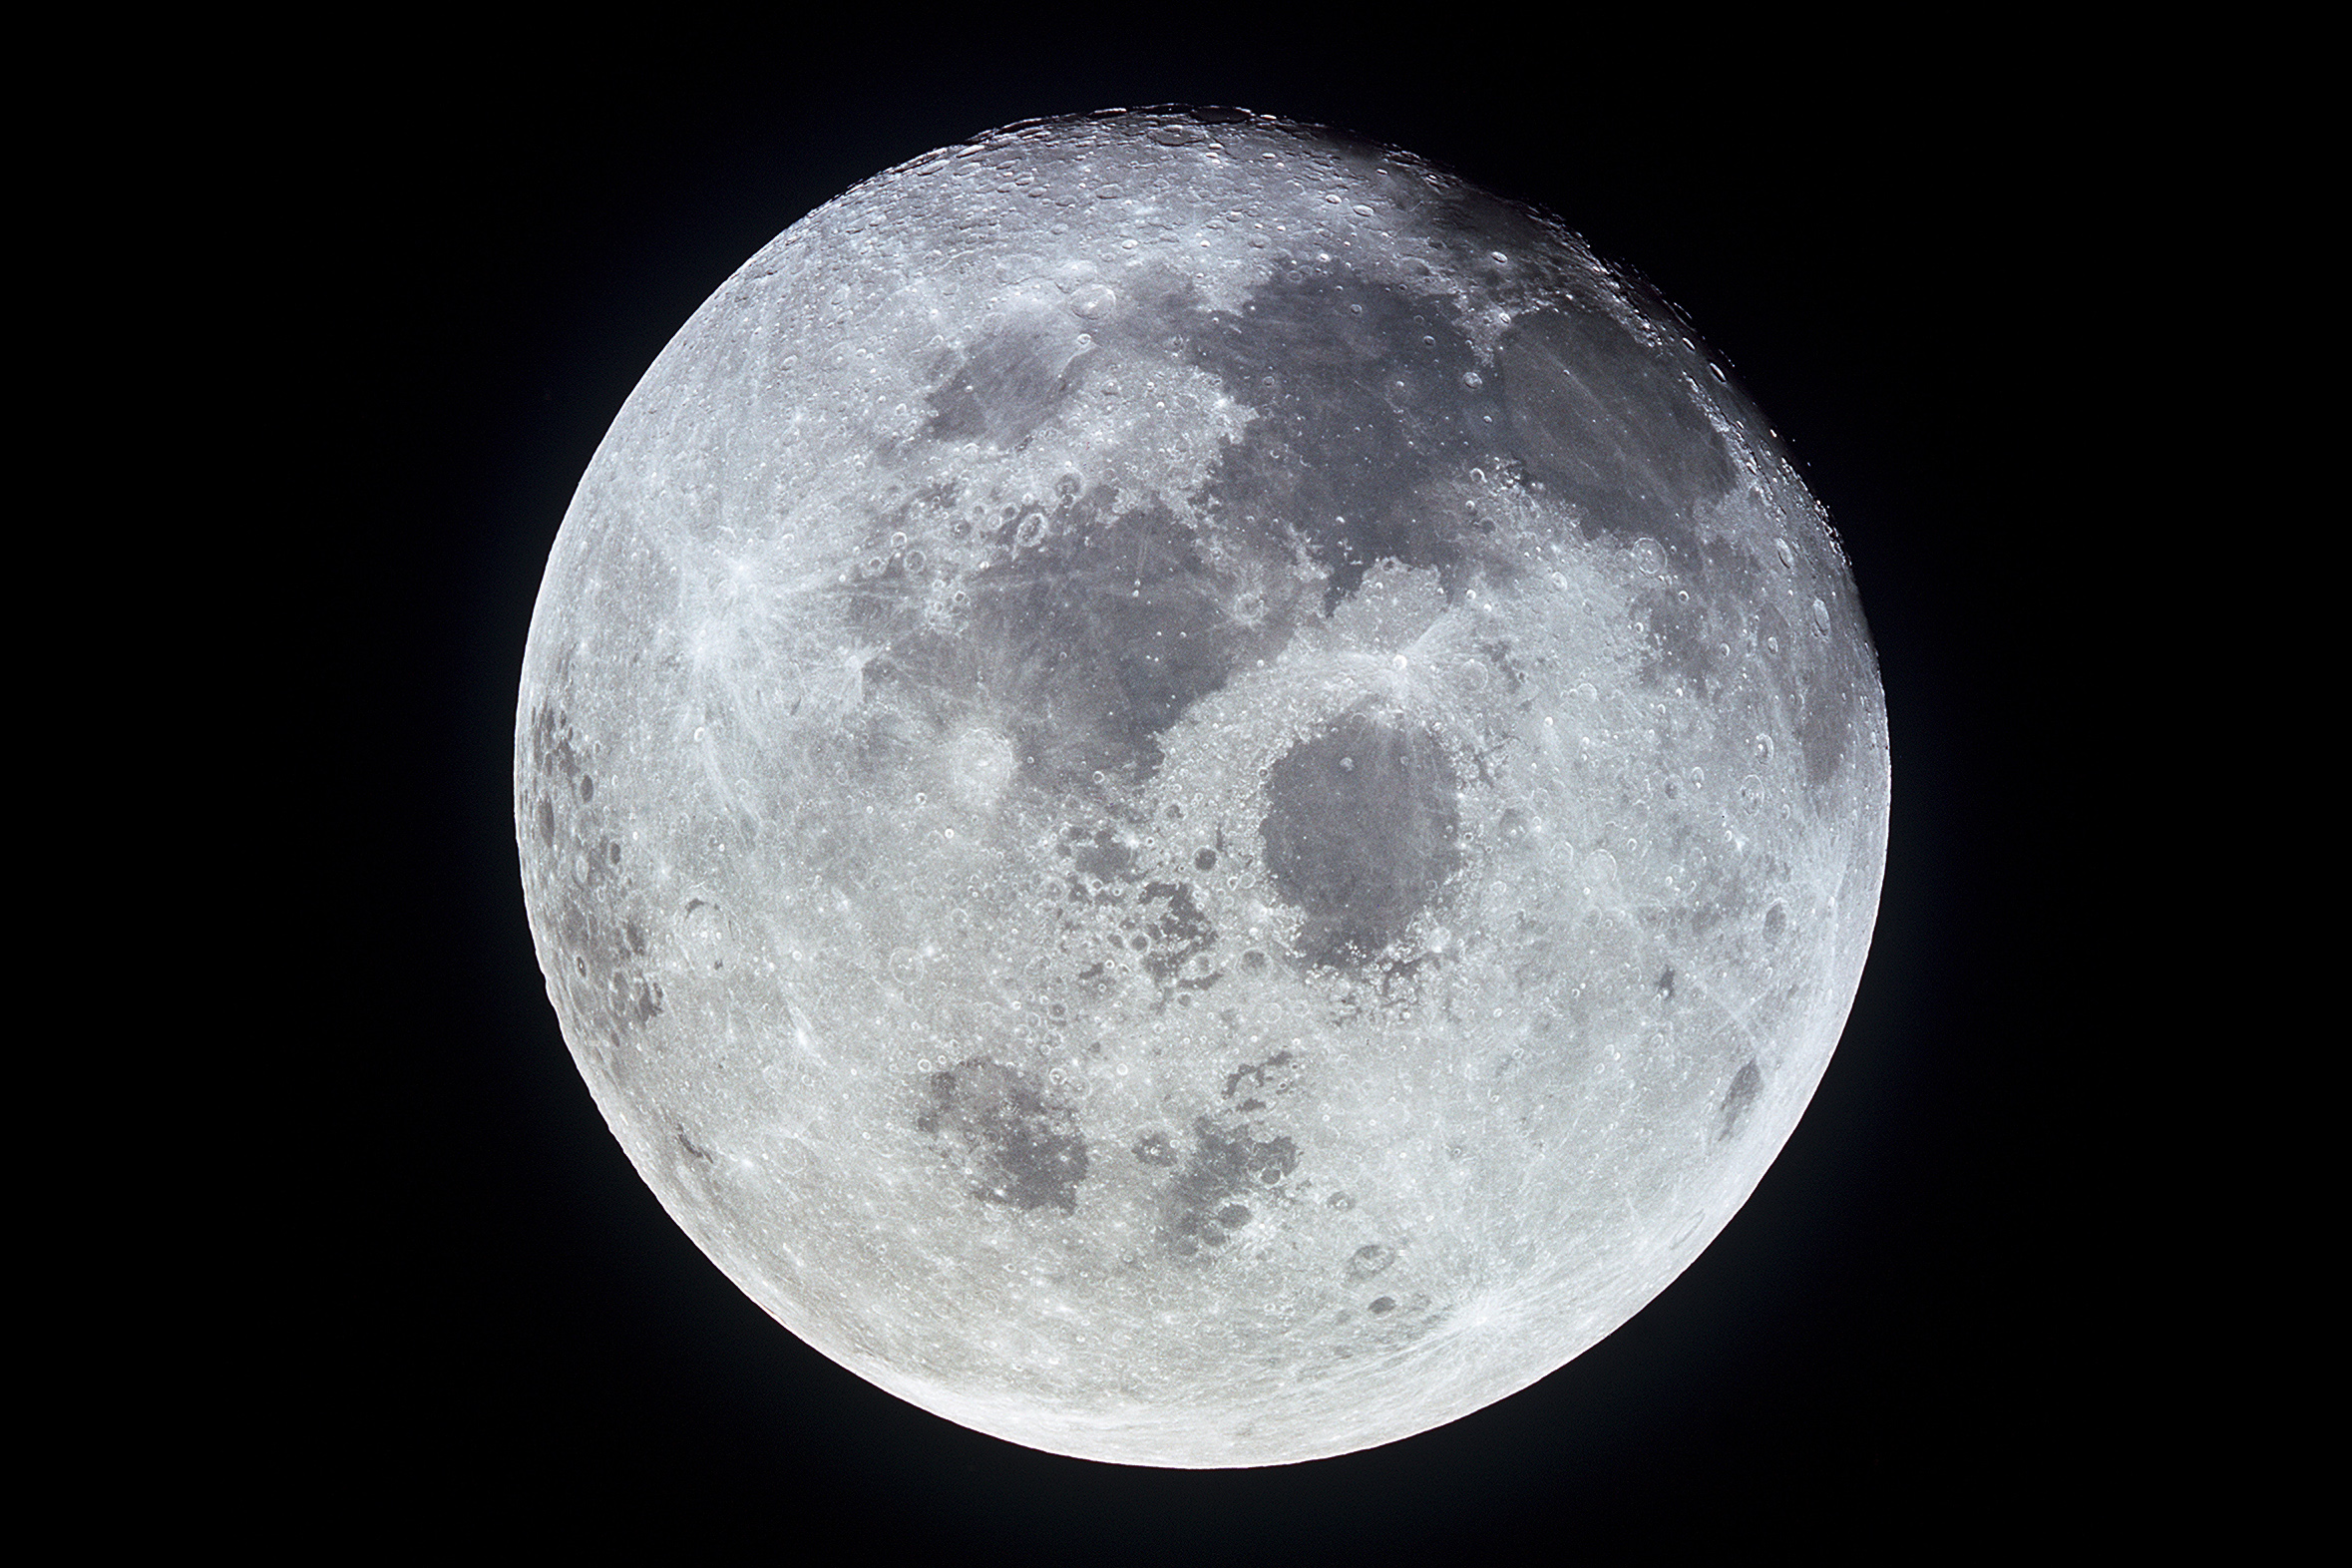 Full moon, as photographed by Apollo 11